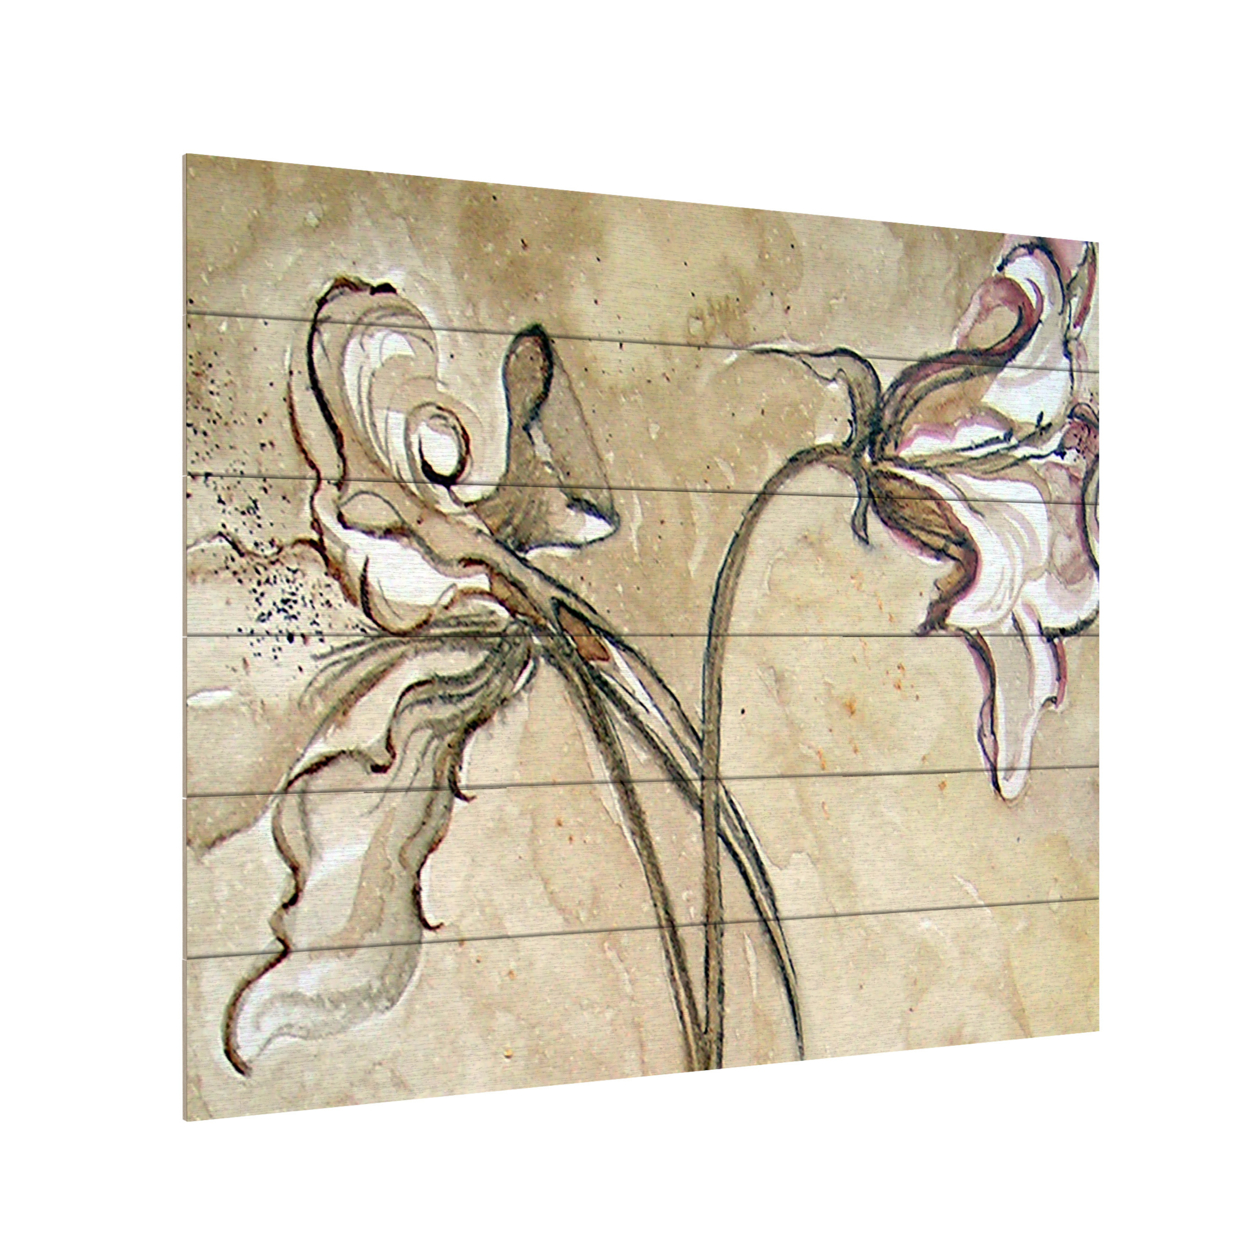 Wooden Slat Art 18 X 22 Inches Titled Flower Talks Ready To Hang Home Decor Picture